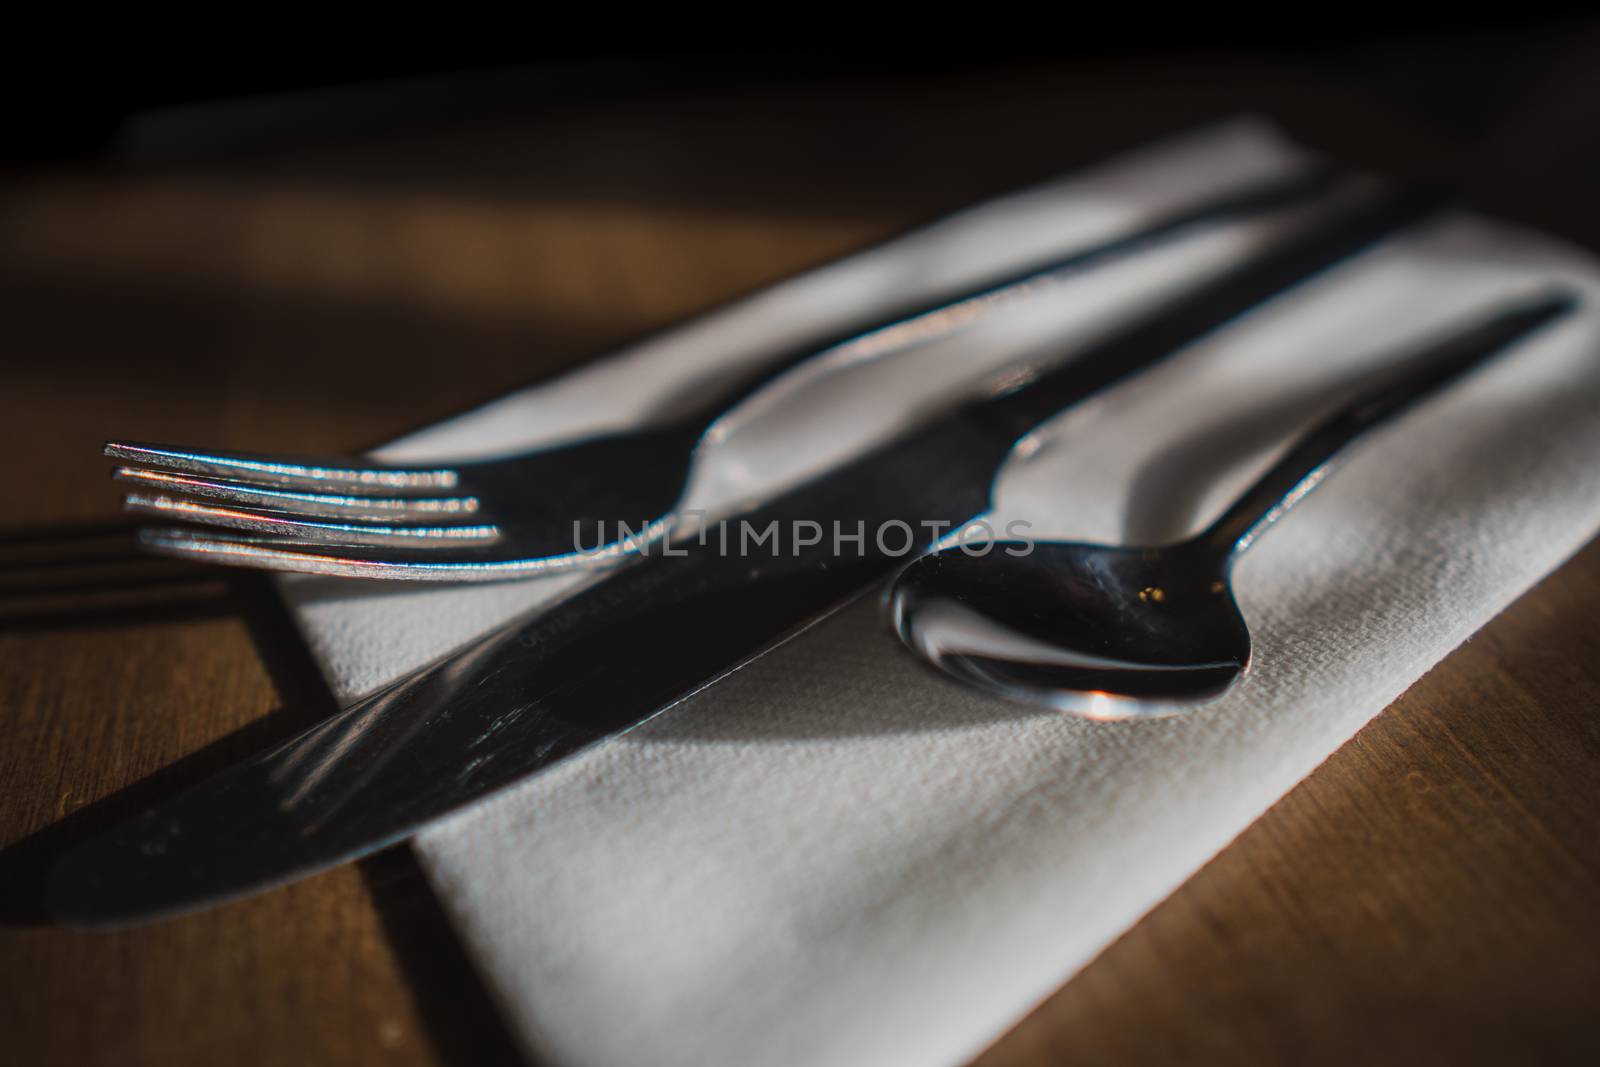 Some silverware, cutlery sat on a white napkin on a wooden table in a cafe setting